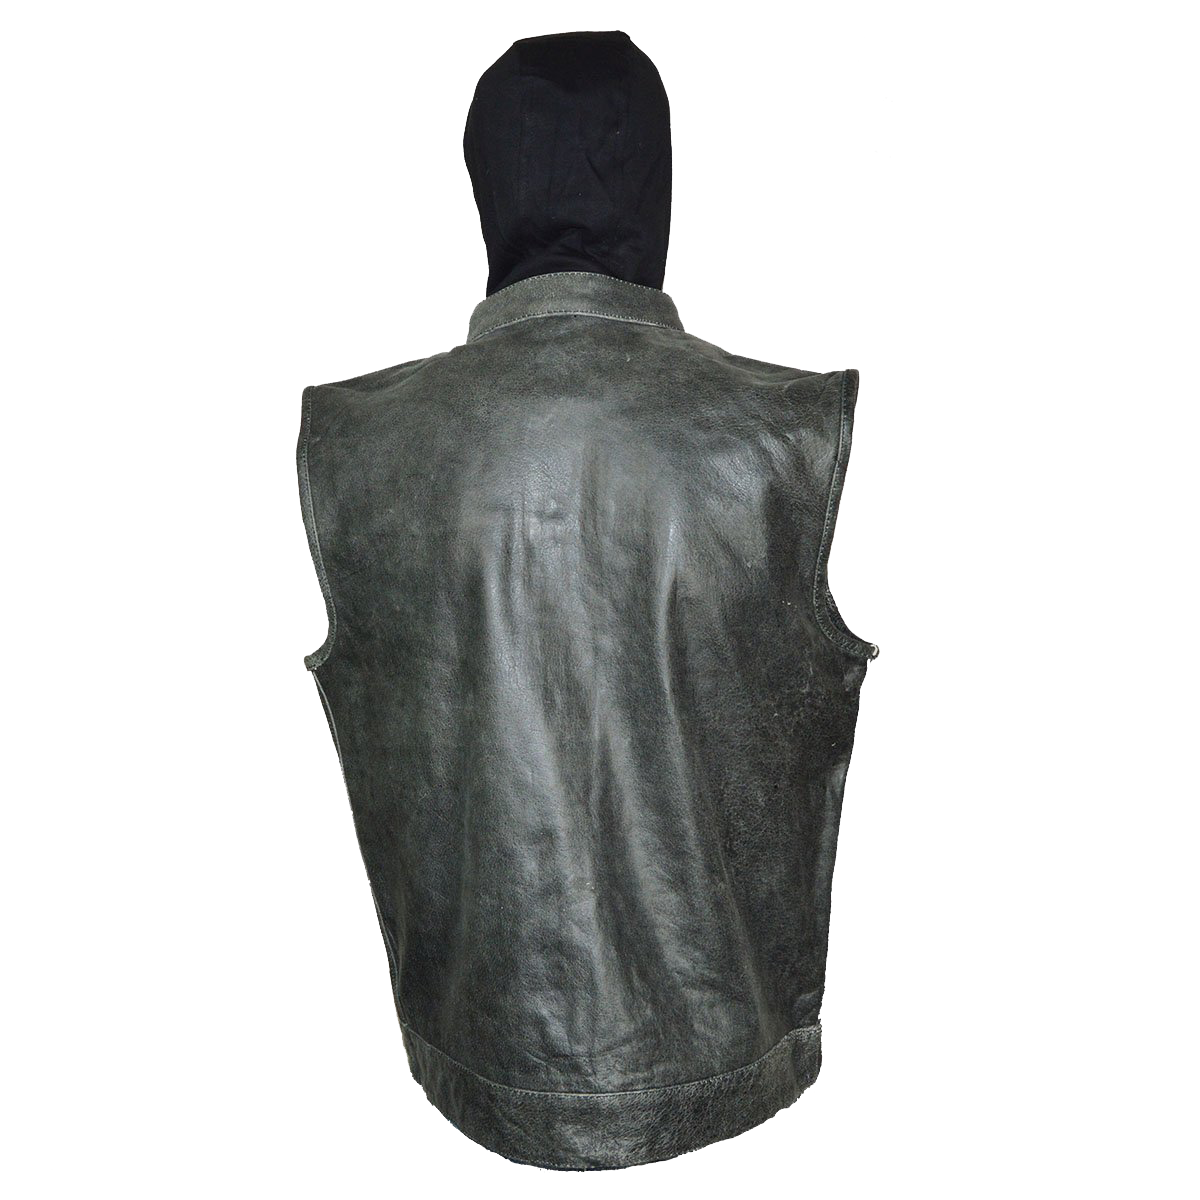 HMM914HDG Distressed Gray Motorcycle Club Leather Vest with Hood